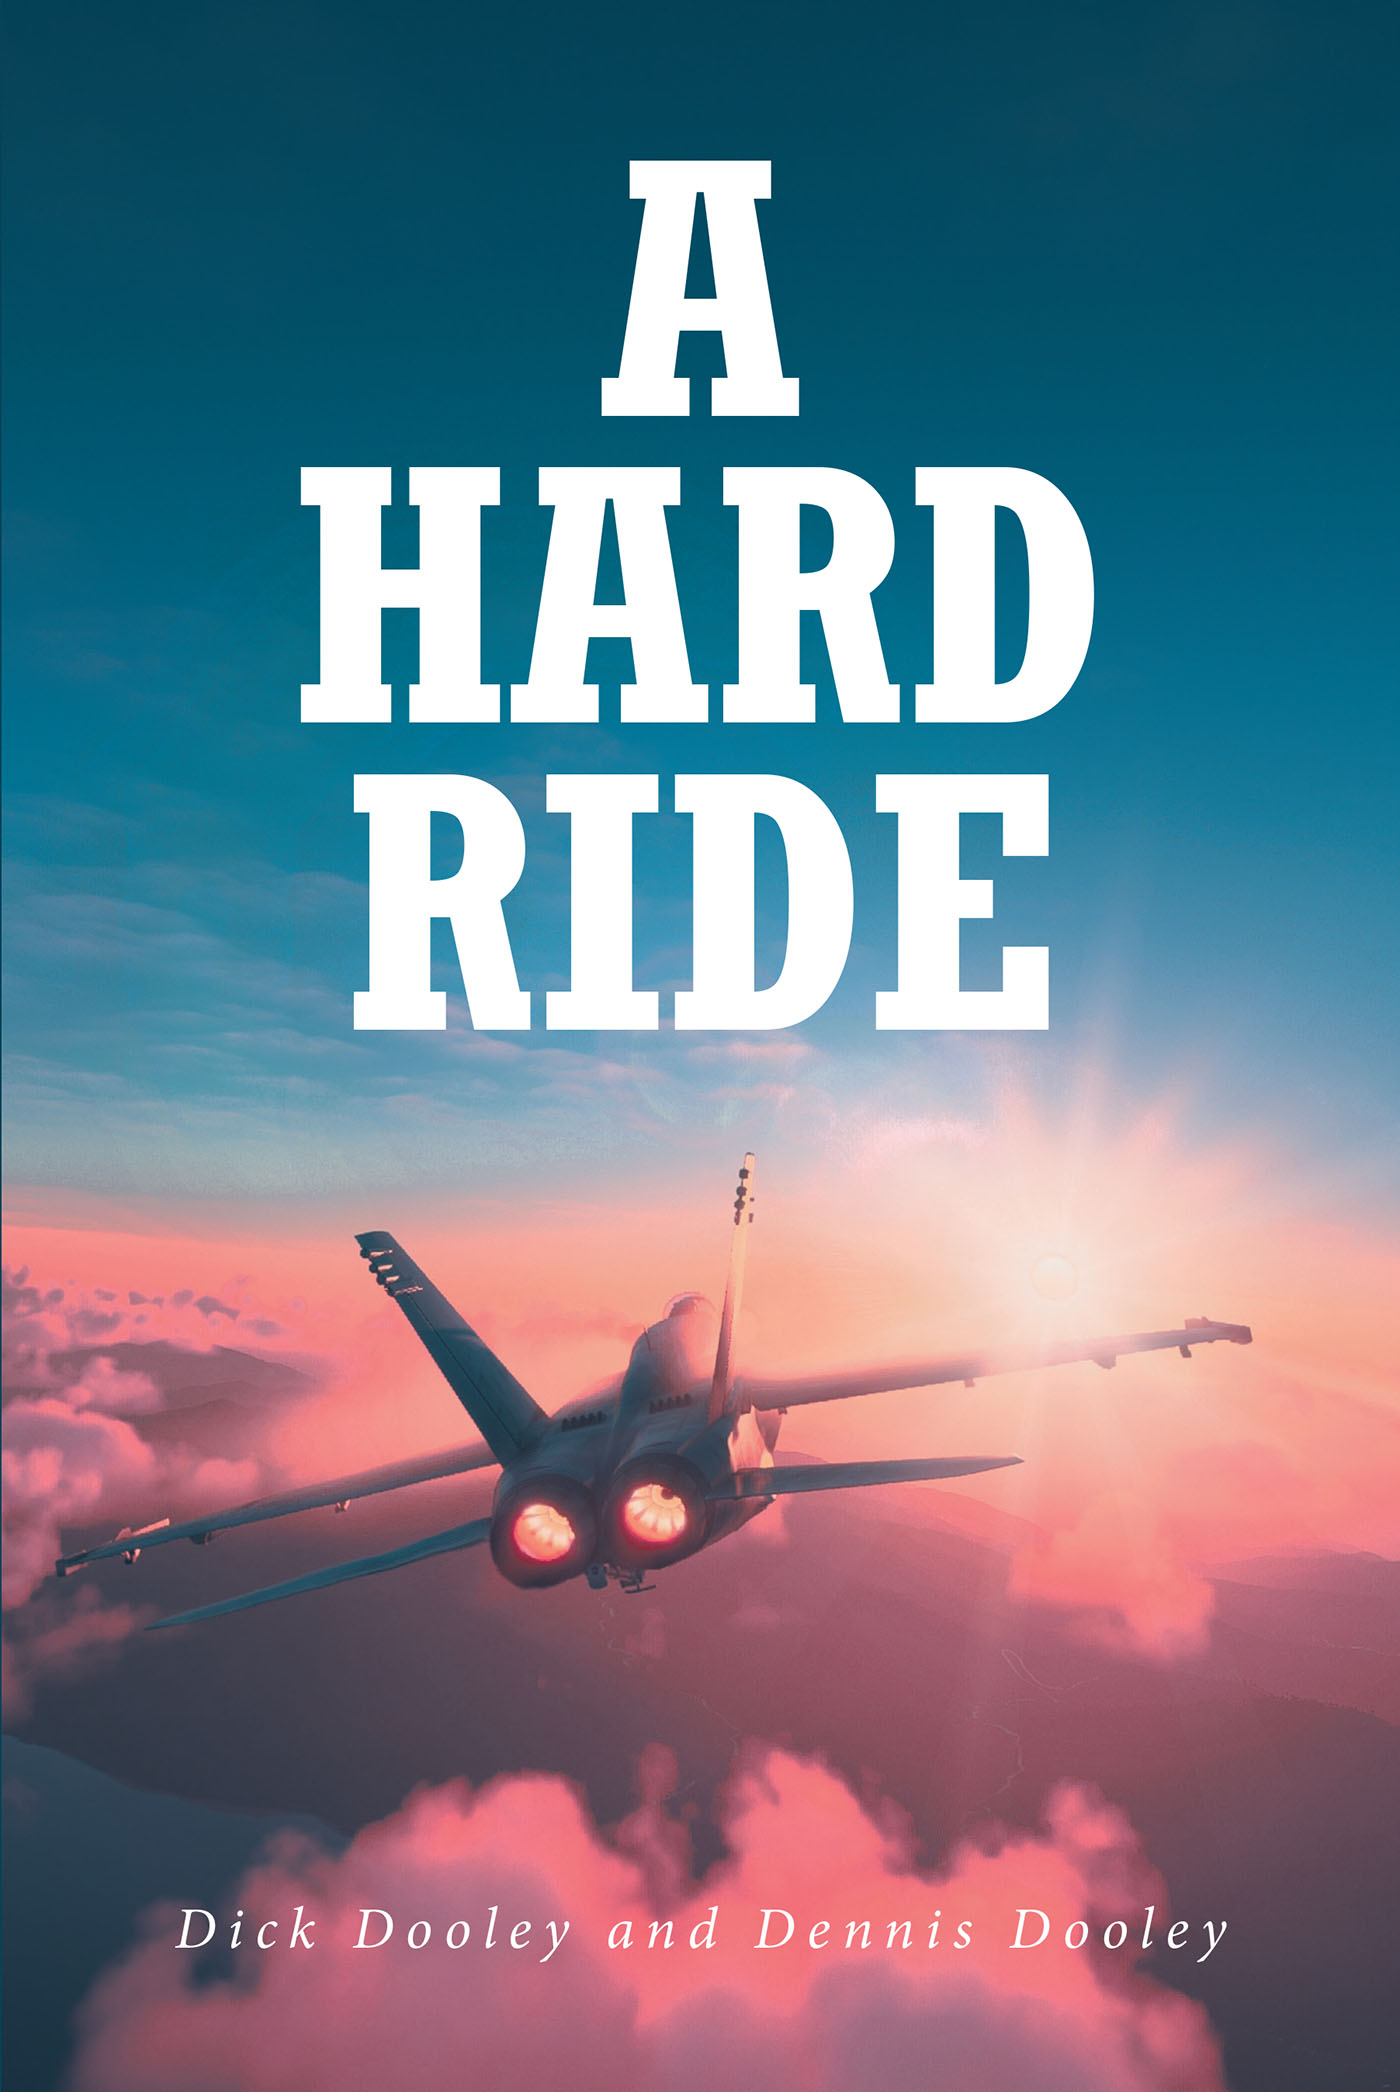 Dick Dooley and Dennis Dooley’s Newly Released “A Hard Ride” is an Engaging Multigenerational Biographical Experience